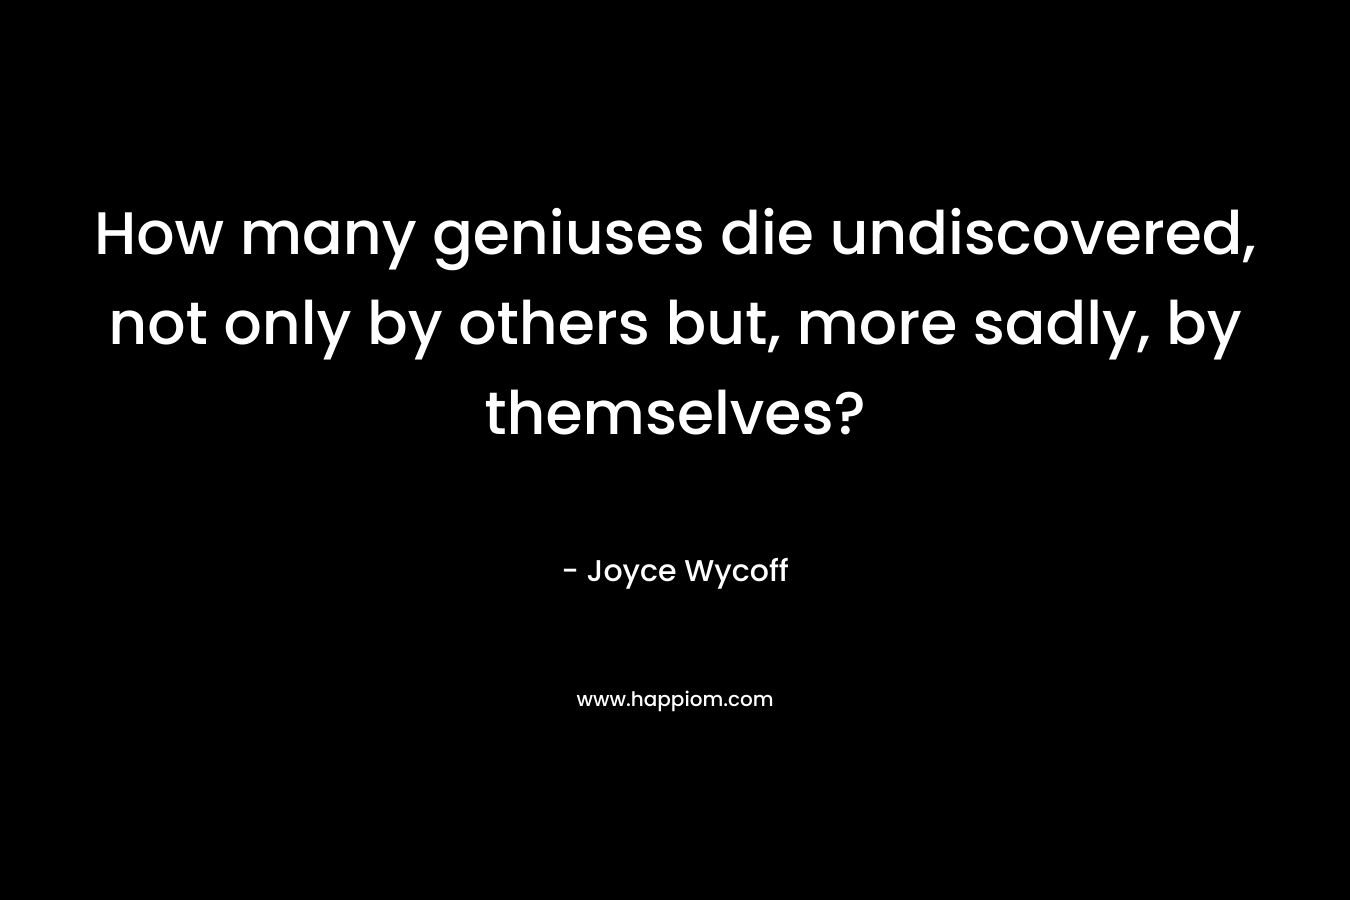 How many geniuses die undiscovered, not only by others but, more sadly, by themselves? – Joyce Wycoff